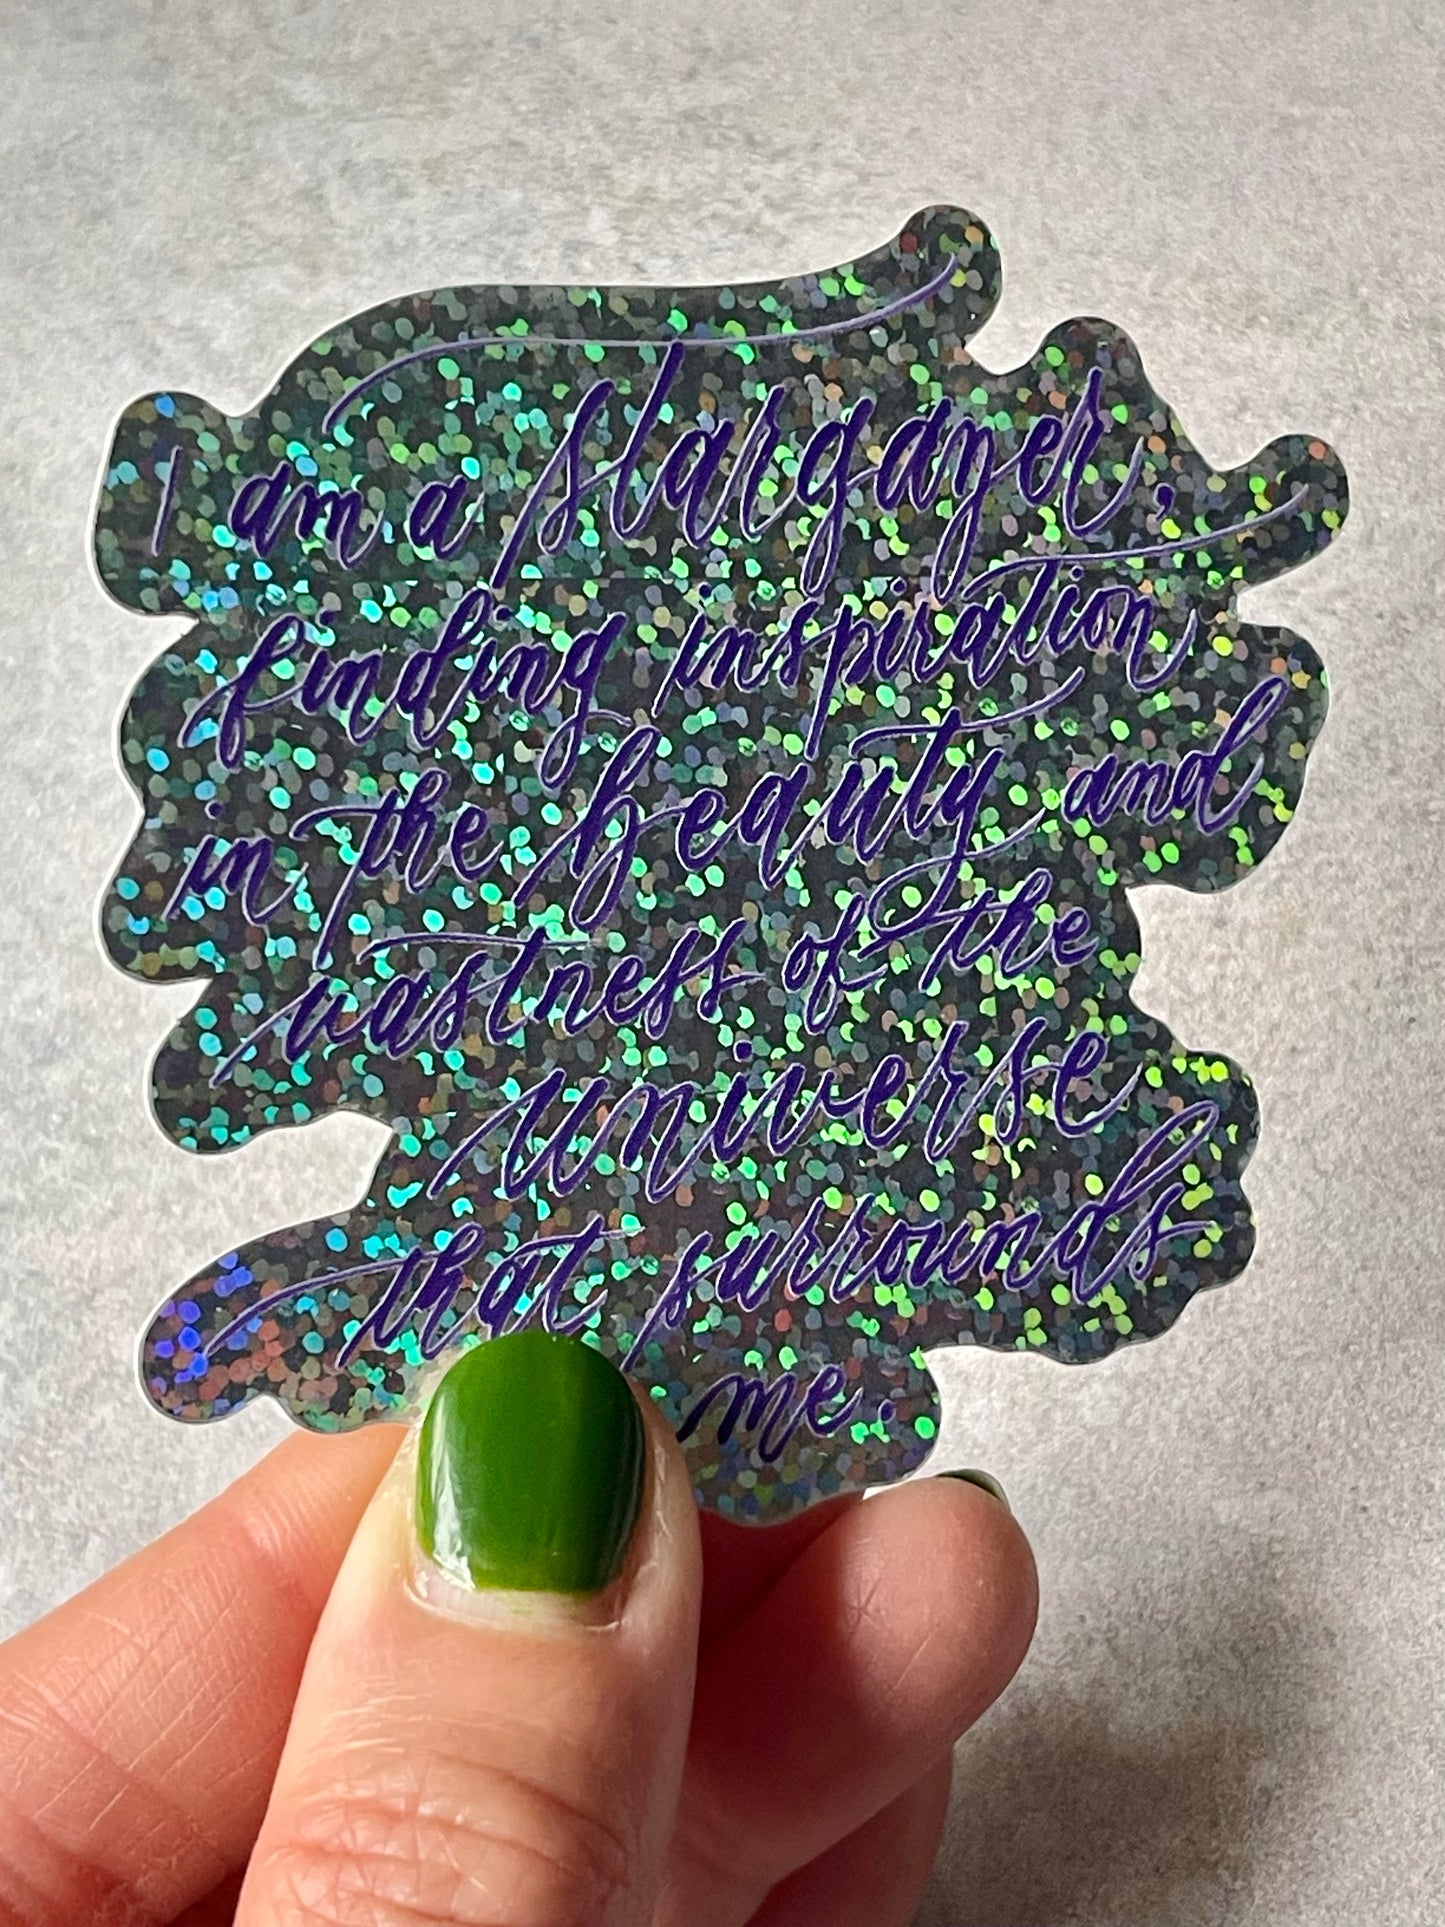 I am a stargazer finding inspiration in the beauty and vastness of the universe that surrounds me script calligraphy glitter sticker in glittery view and white lining to text.